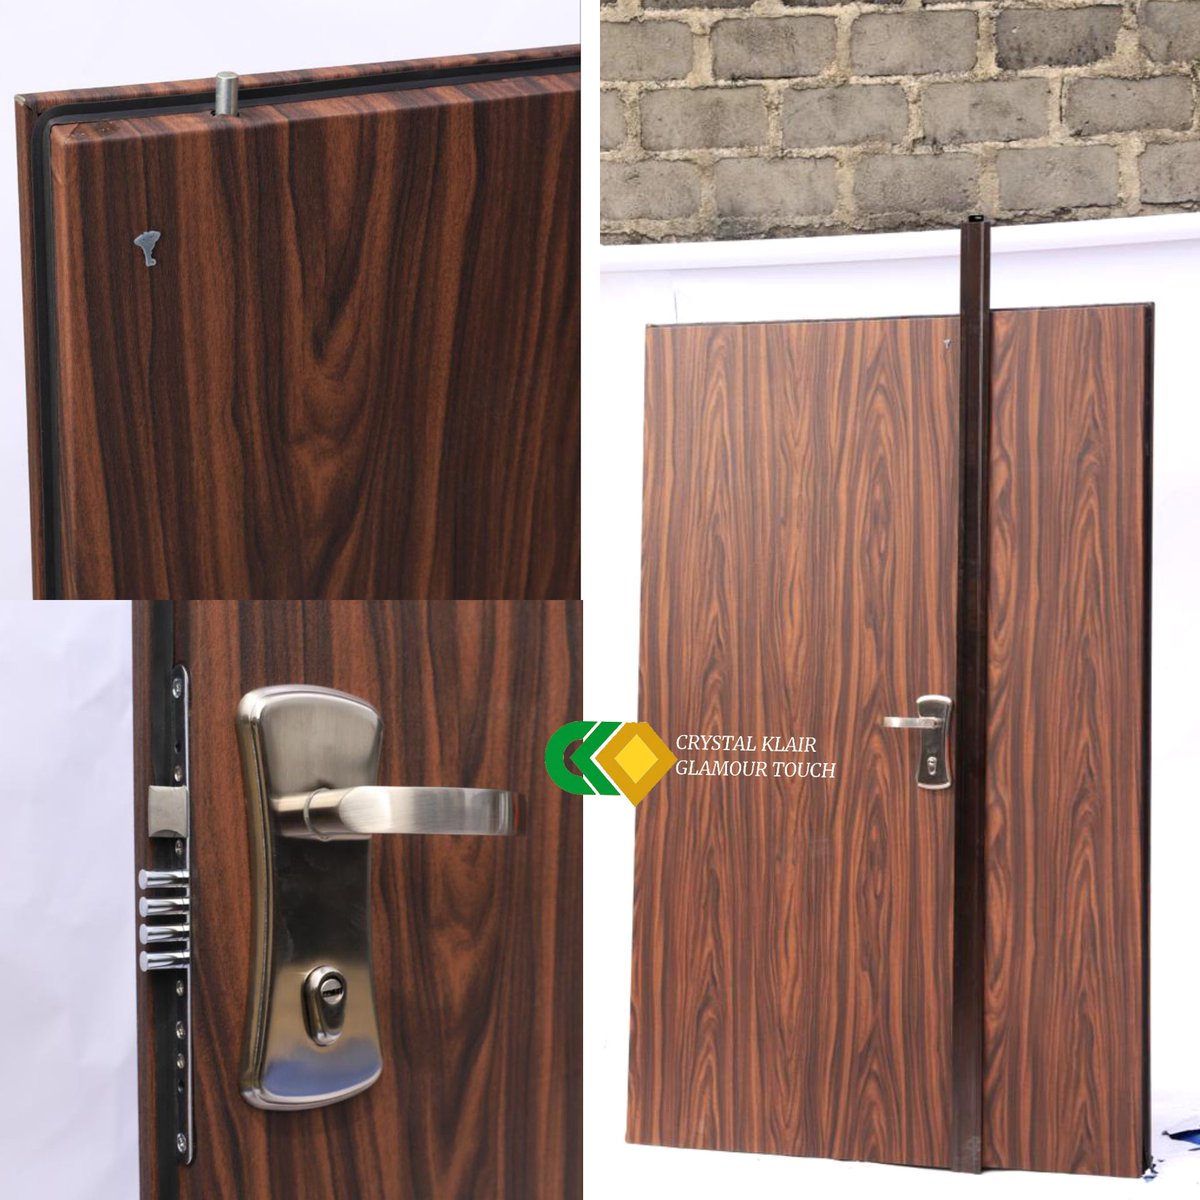 ISRAELI BUNKER SECURITY DOOR
With 4-way multi lock system

IN STOCK 
We also offer installation services 

#crystalklair

📍B07, VGI CENTRE, WUYE, ABUJA, NIGERIA
📞 07036379192 or 08086612080

#securitysolutions #security #doors #securitydoors #home #Office  #homefinishing